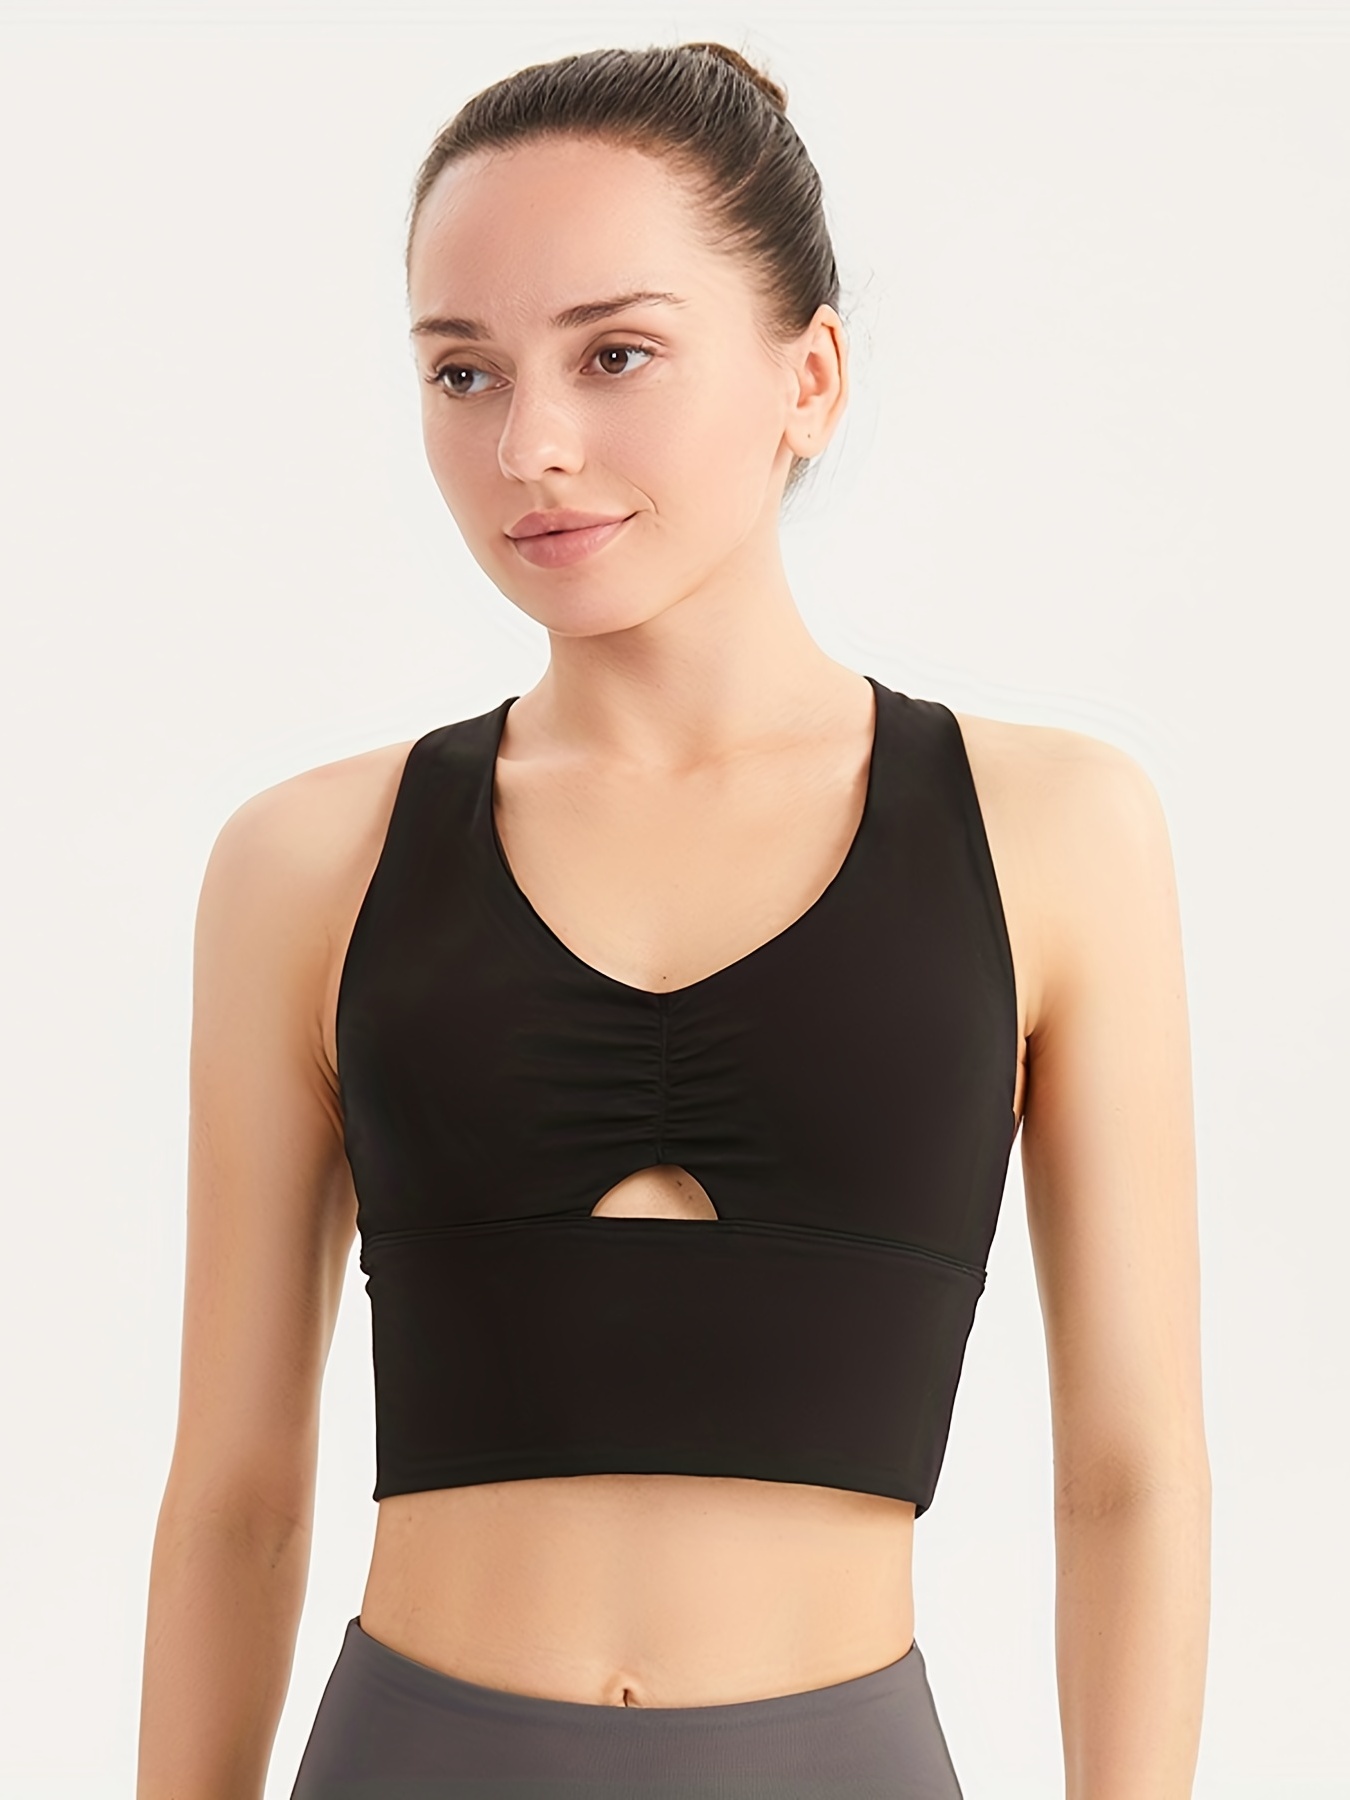 Women's Sports Bra Cutout Quick Dry Athletic Bra Solid Color